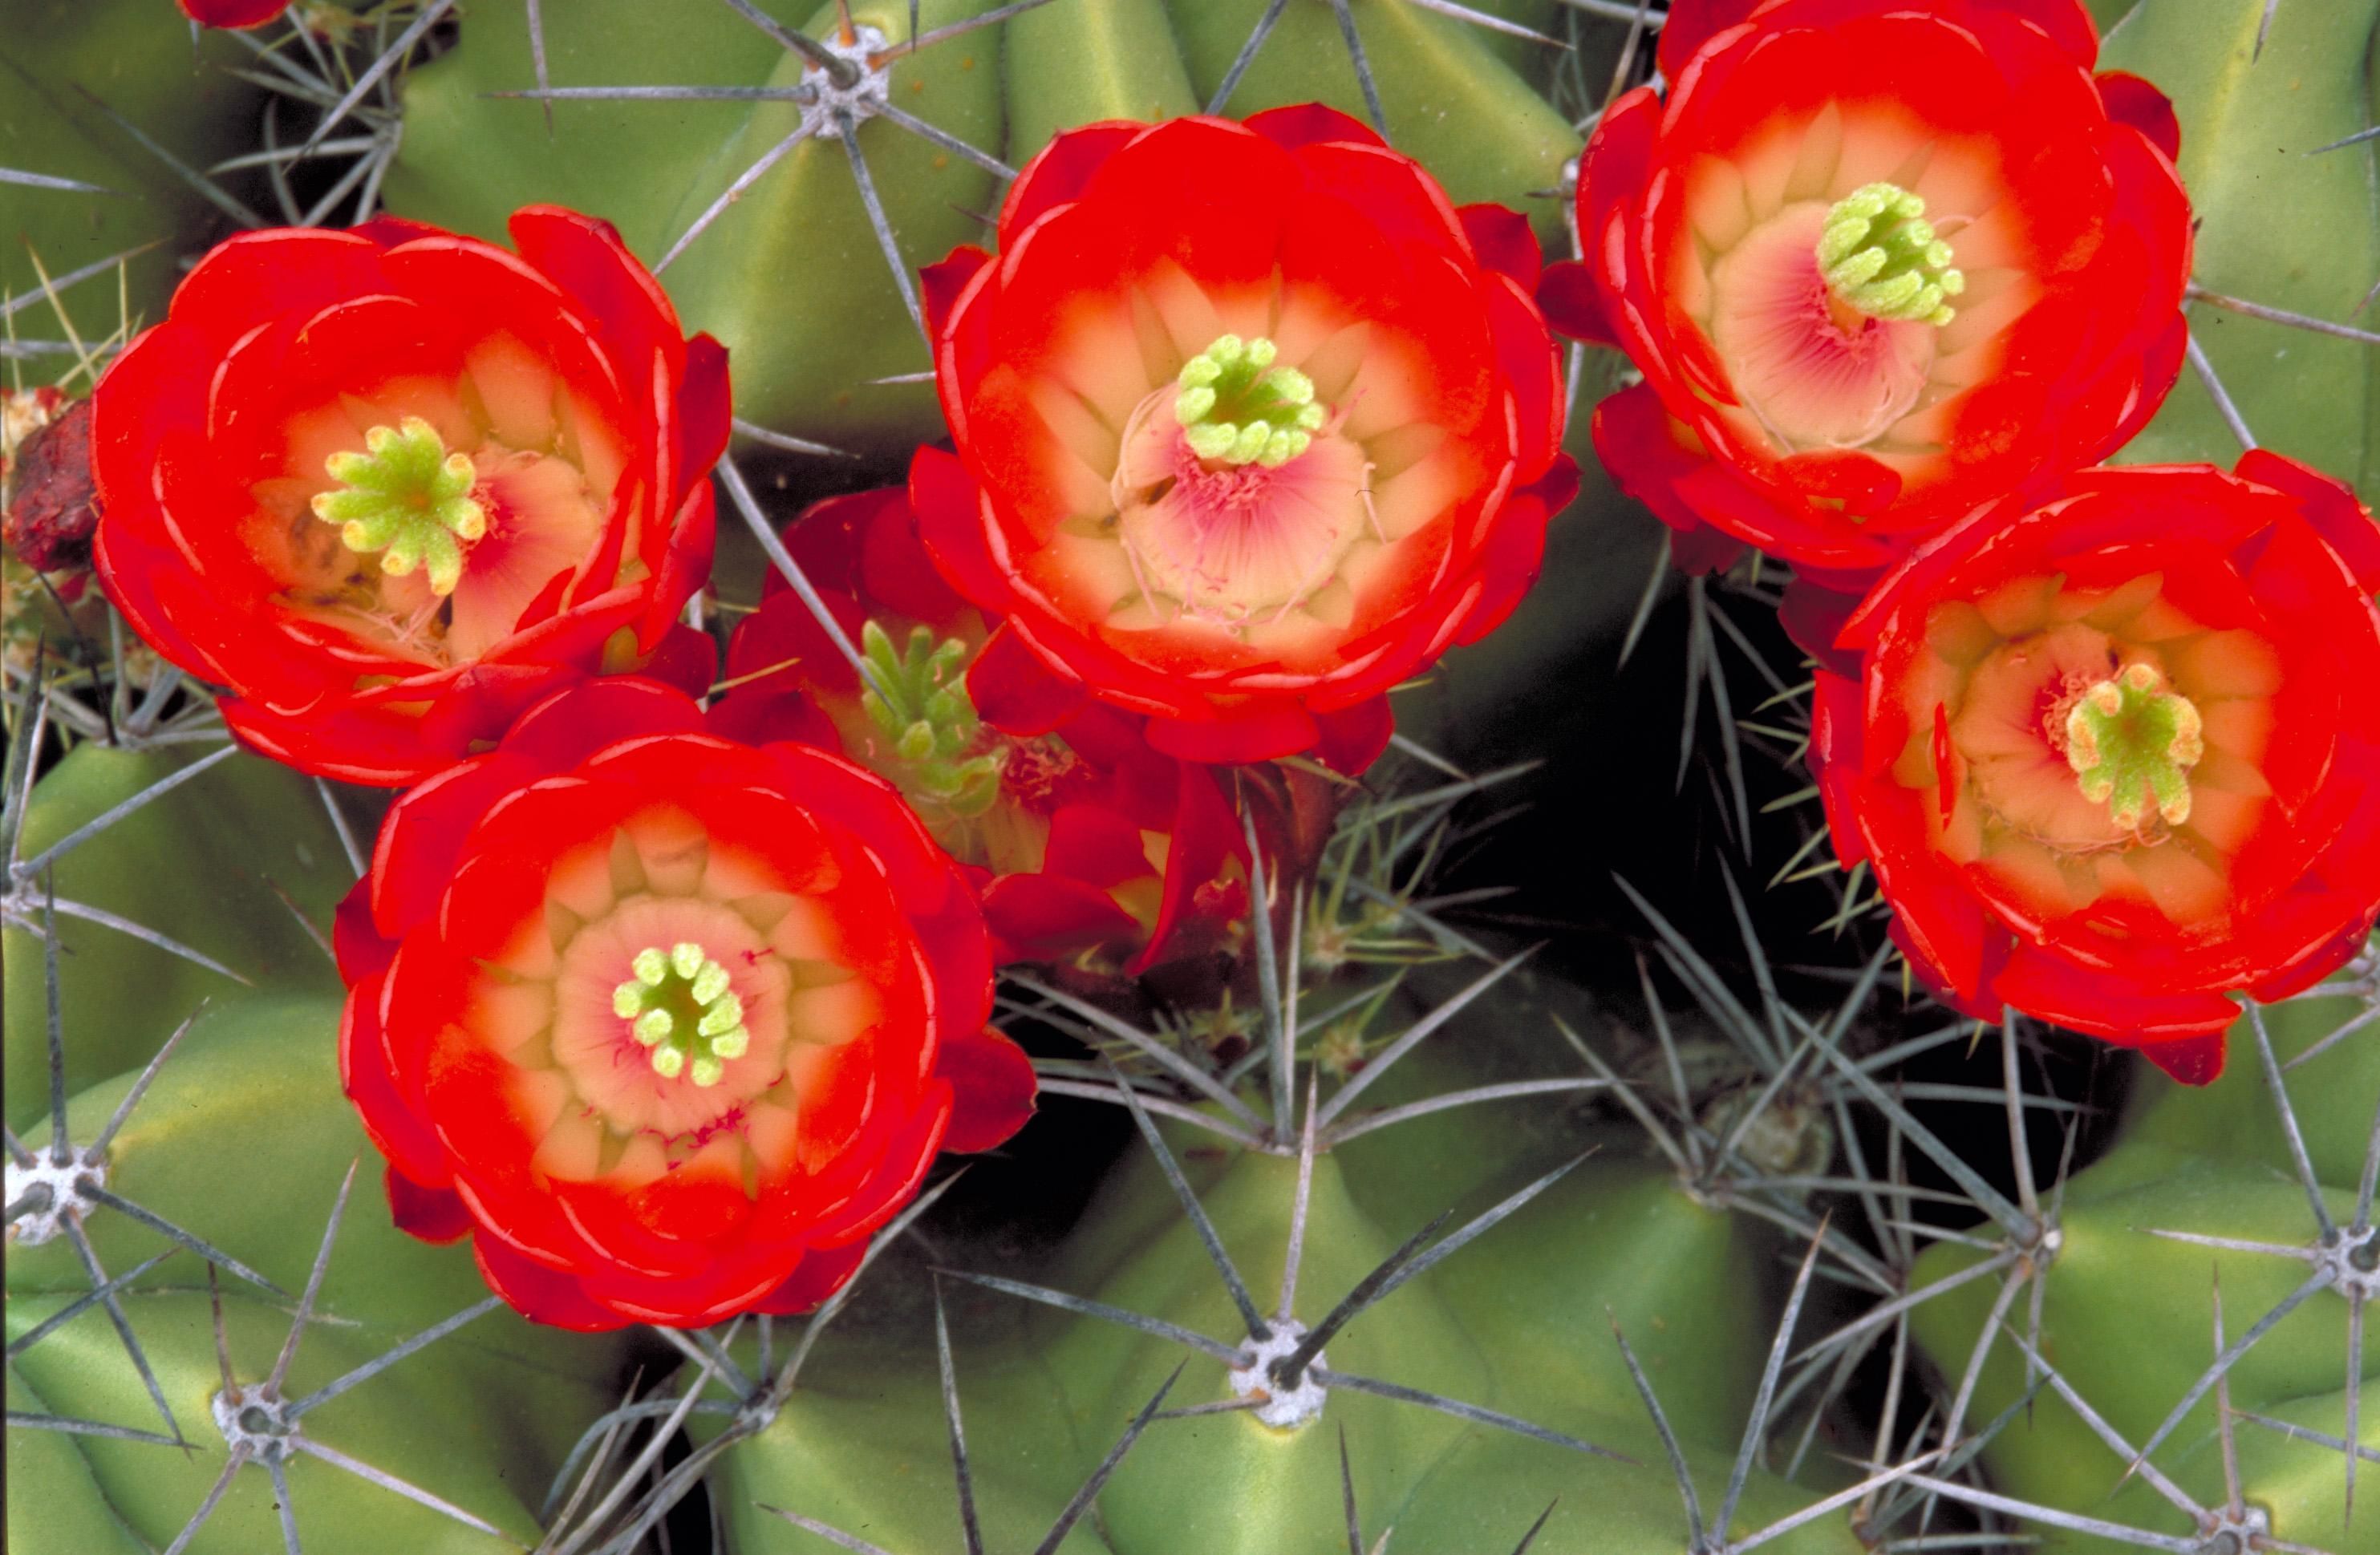 File:Cactus red flowers.jpg - Wikimedia Commons